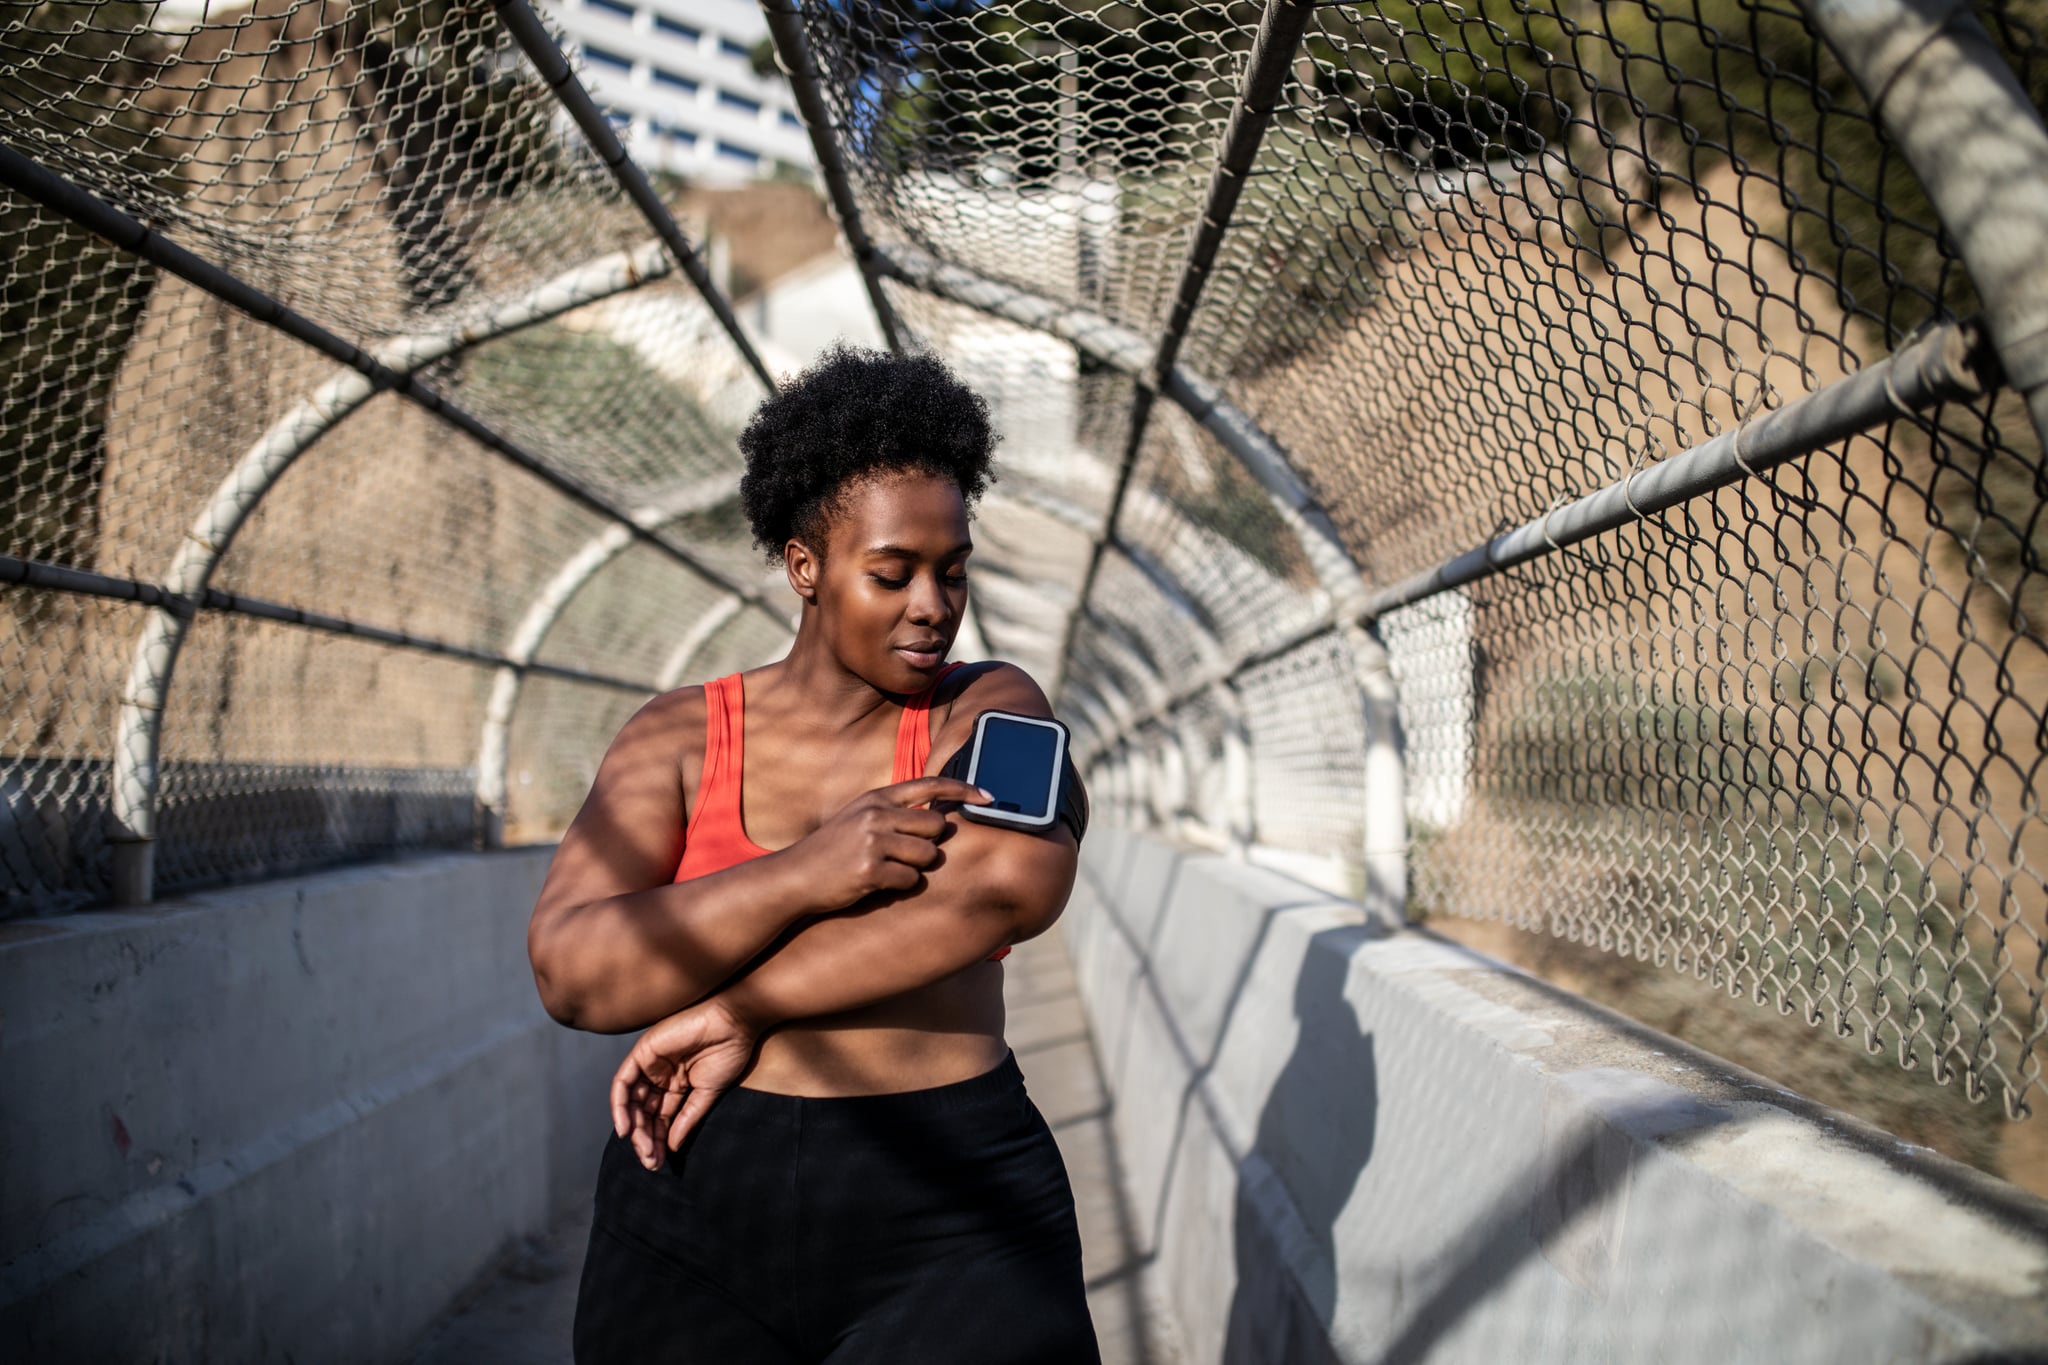 Healthy woman touching phone screen on armband before exercising outdoors. African american woman in sports clothing using phone while exercising outdoors.